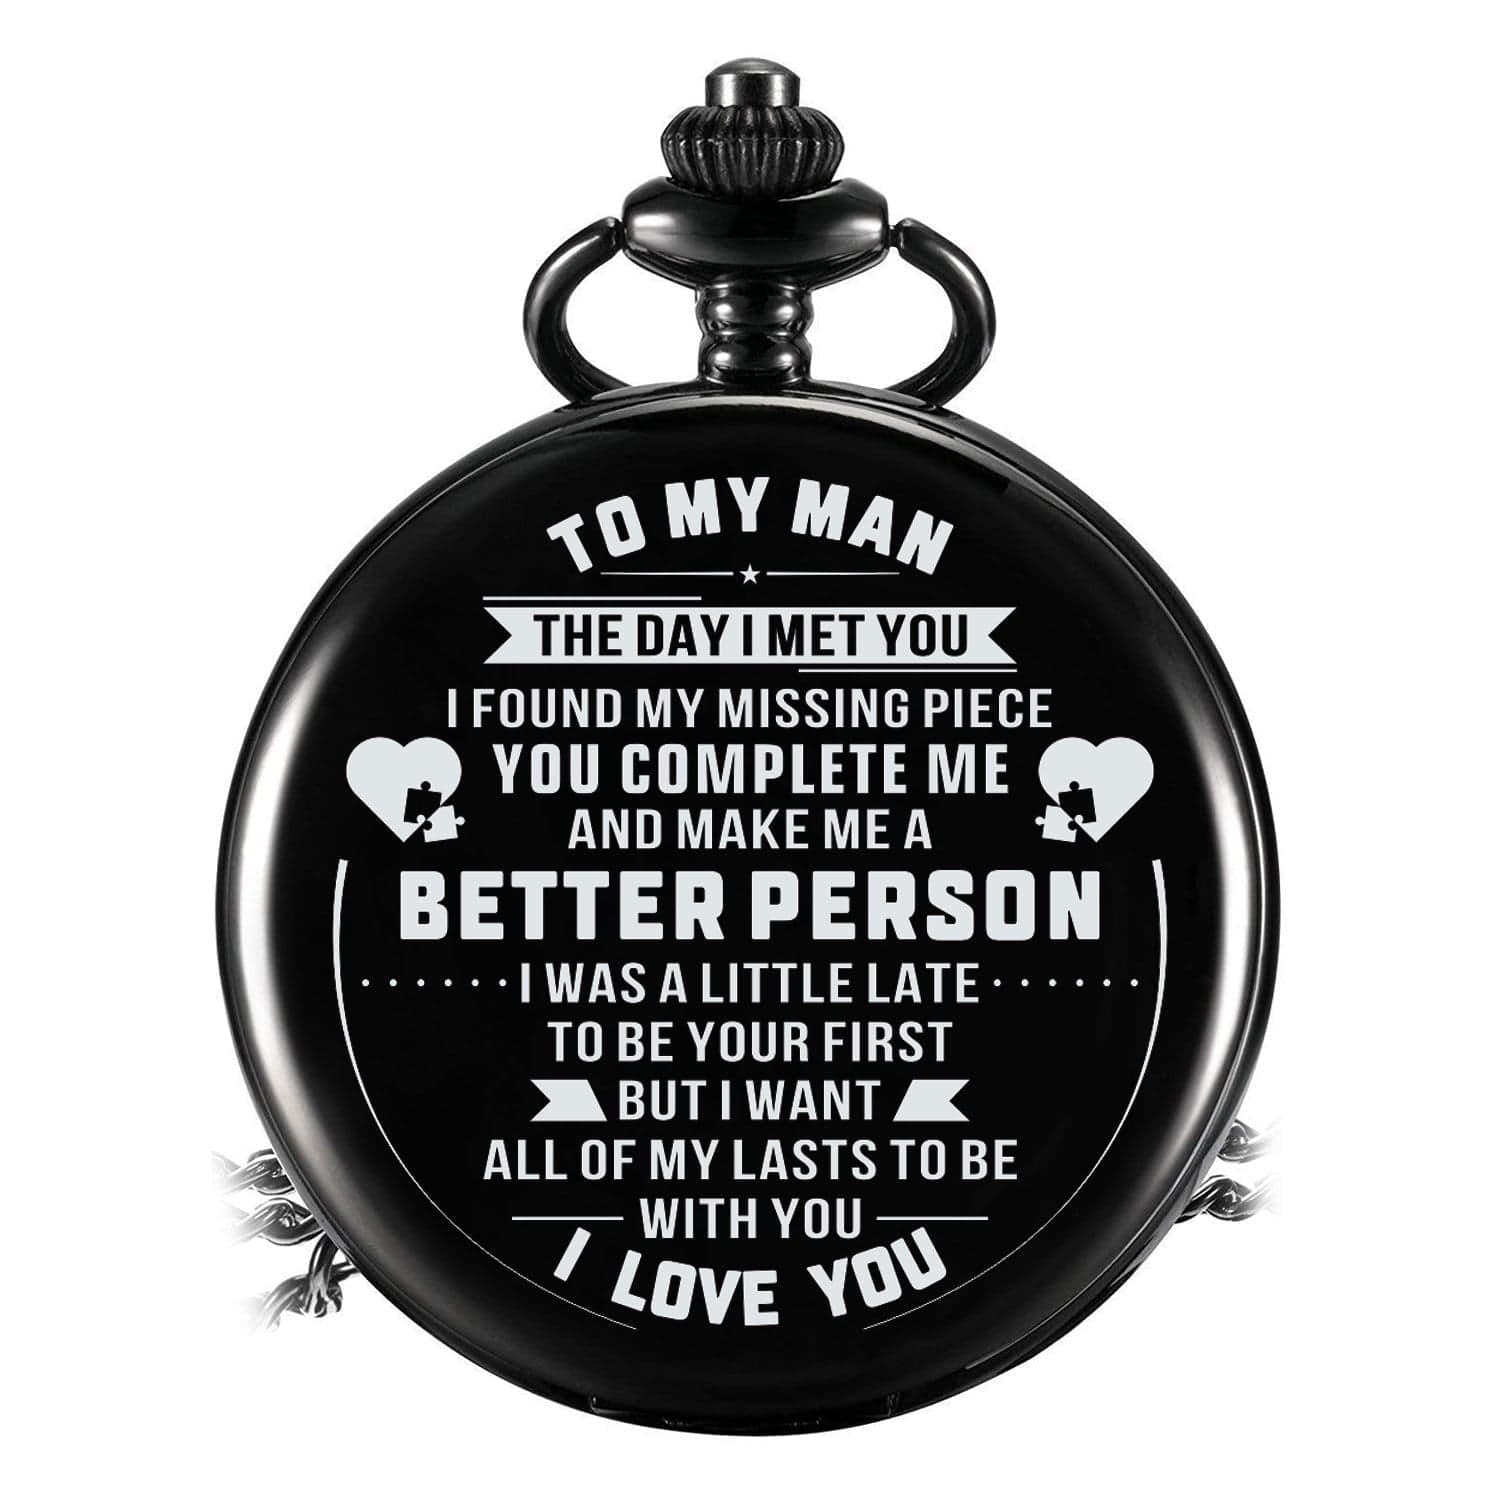 Pocket Watches For Lovers To My Man - All Of My Lasts To Be With You Pocket Watch GiveMe-Gifts